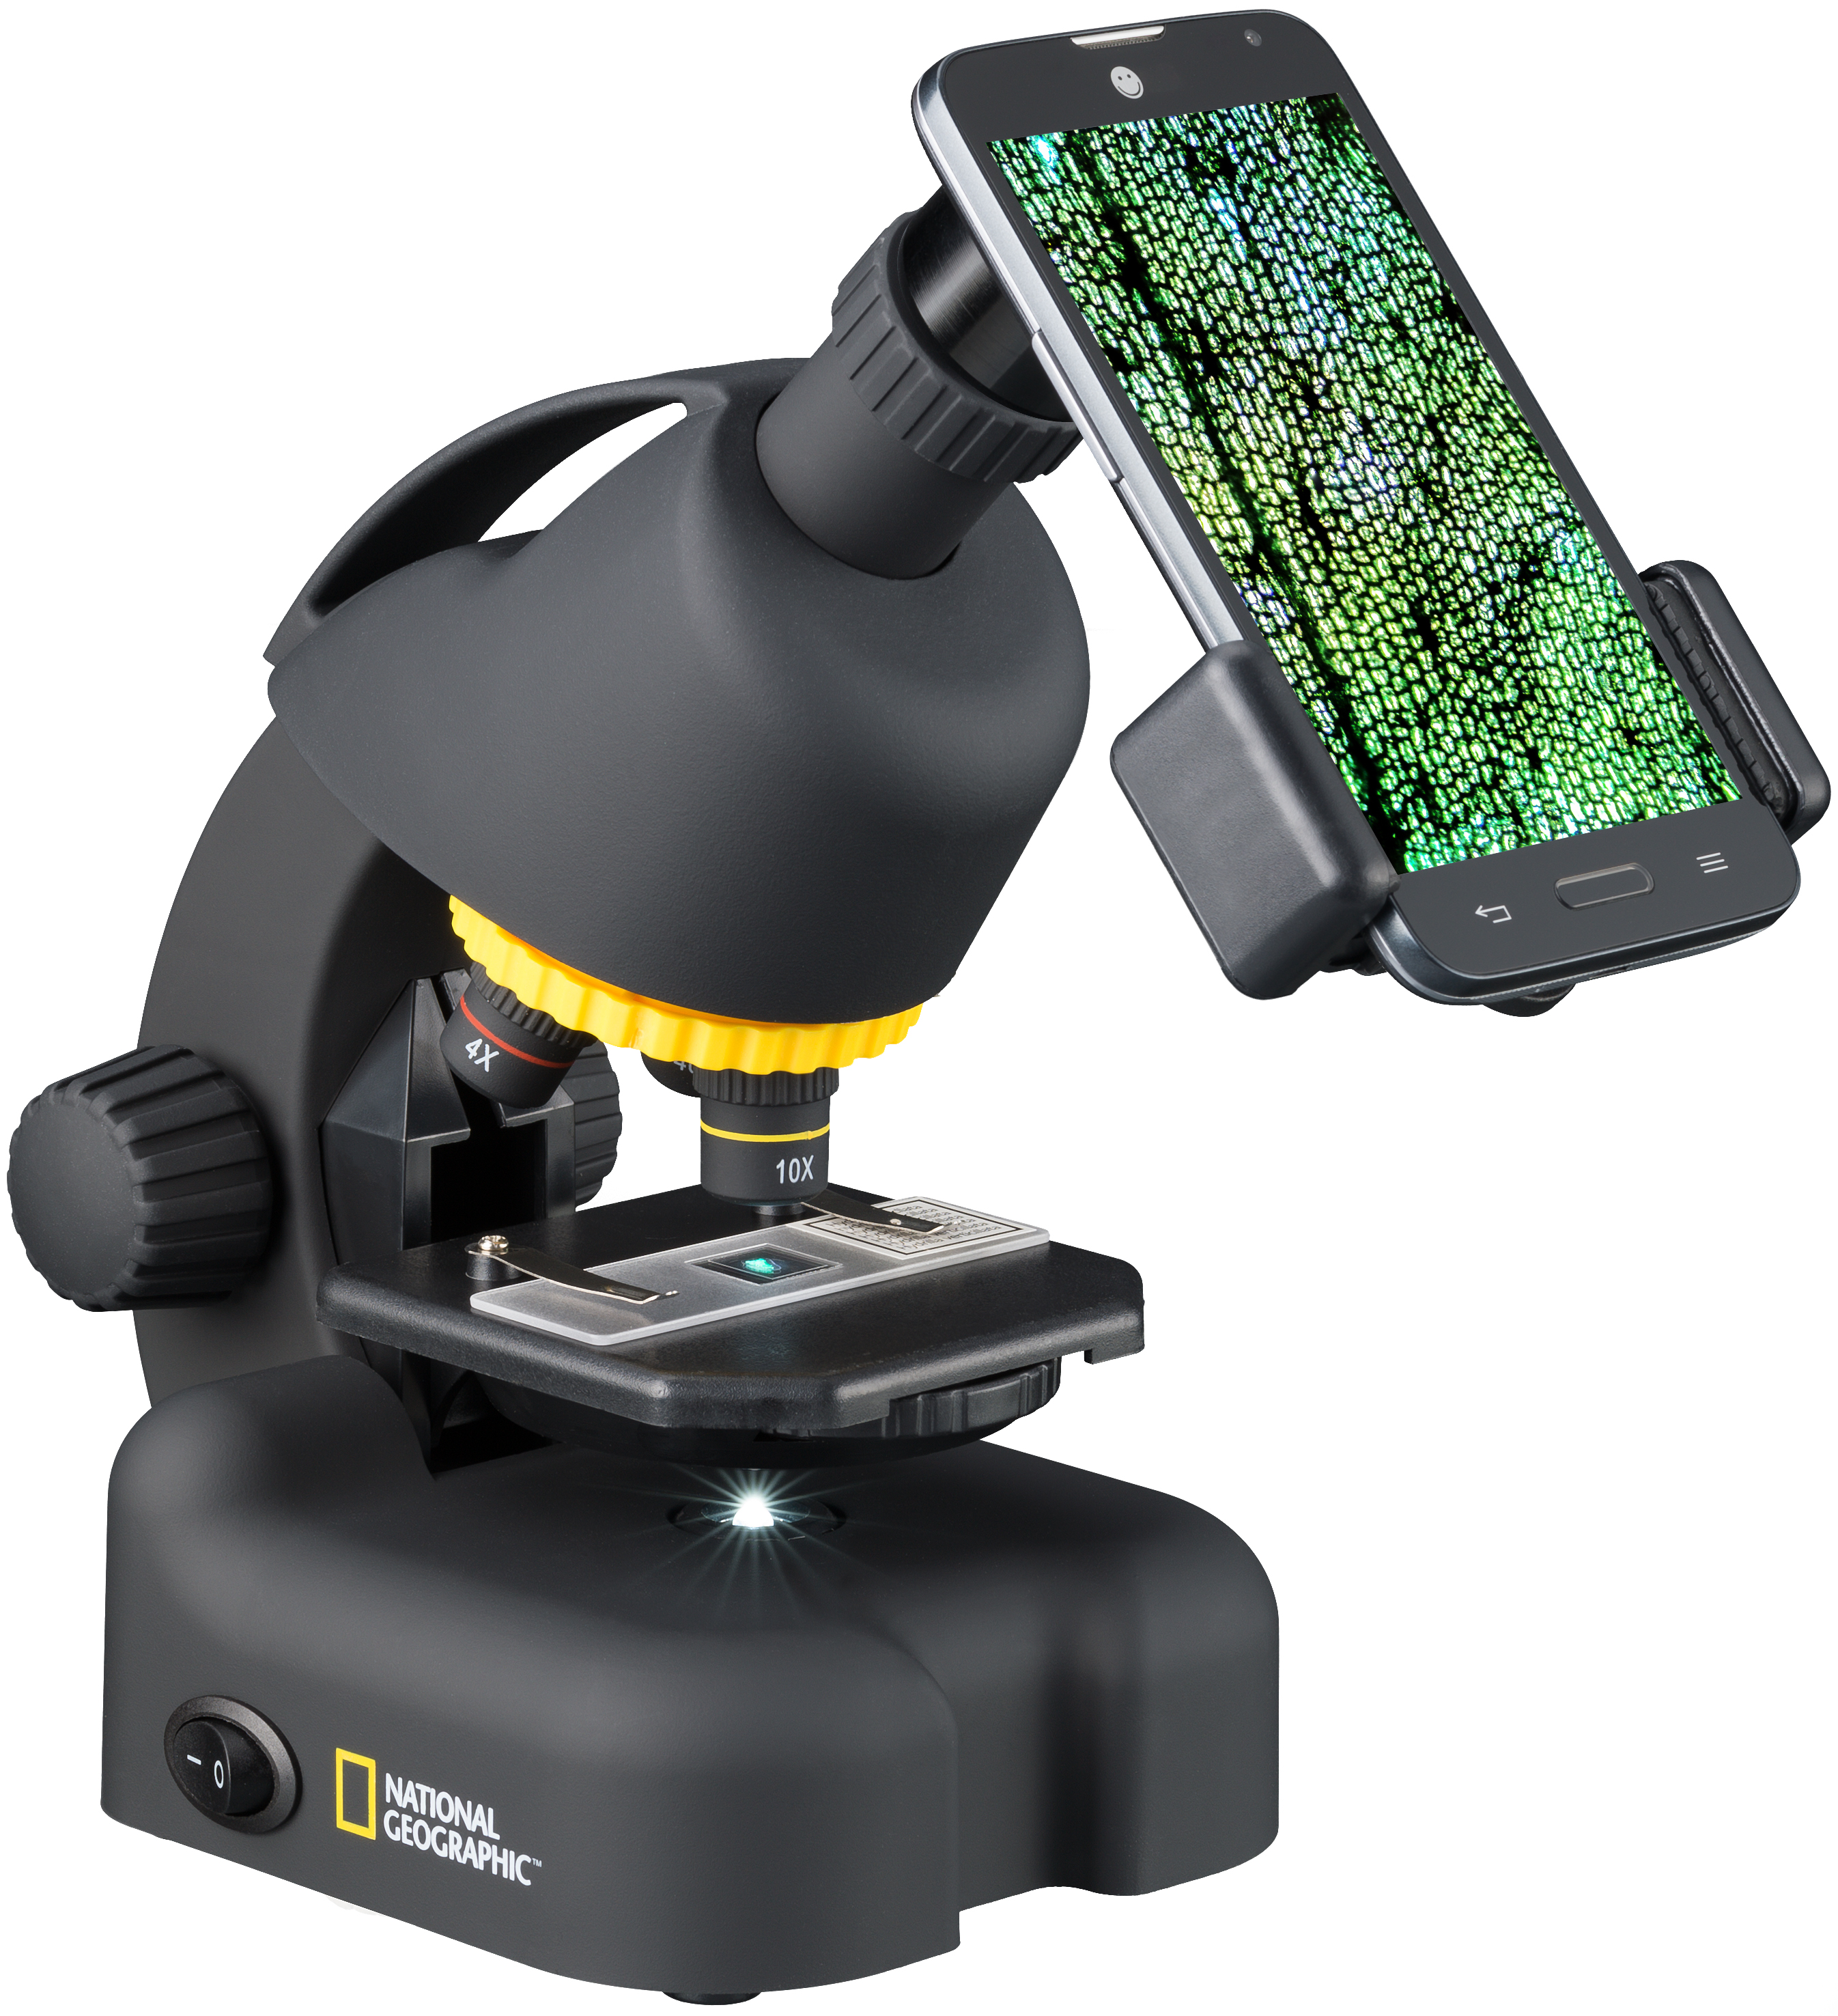 NATIONAL GEOGRAPHIC 40-640x Mikroskop inkl. Smartphone Adapter